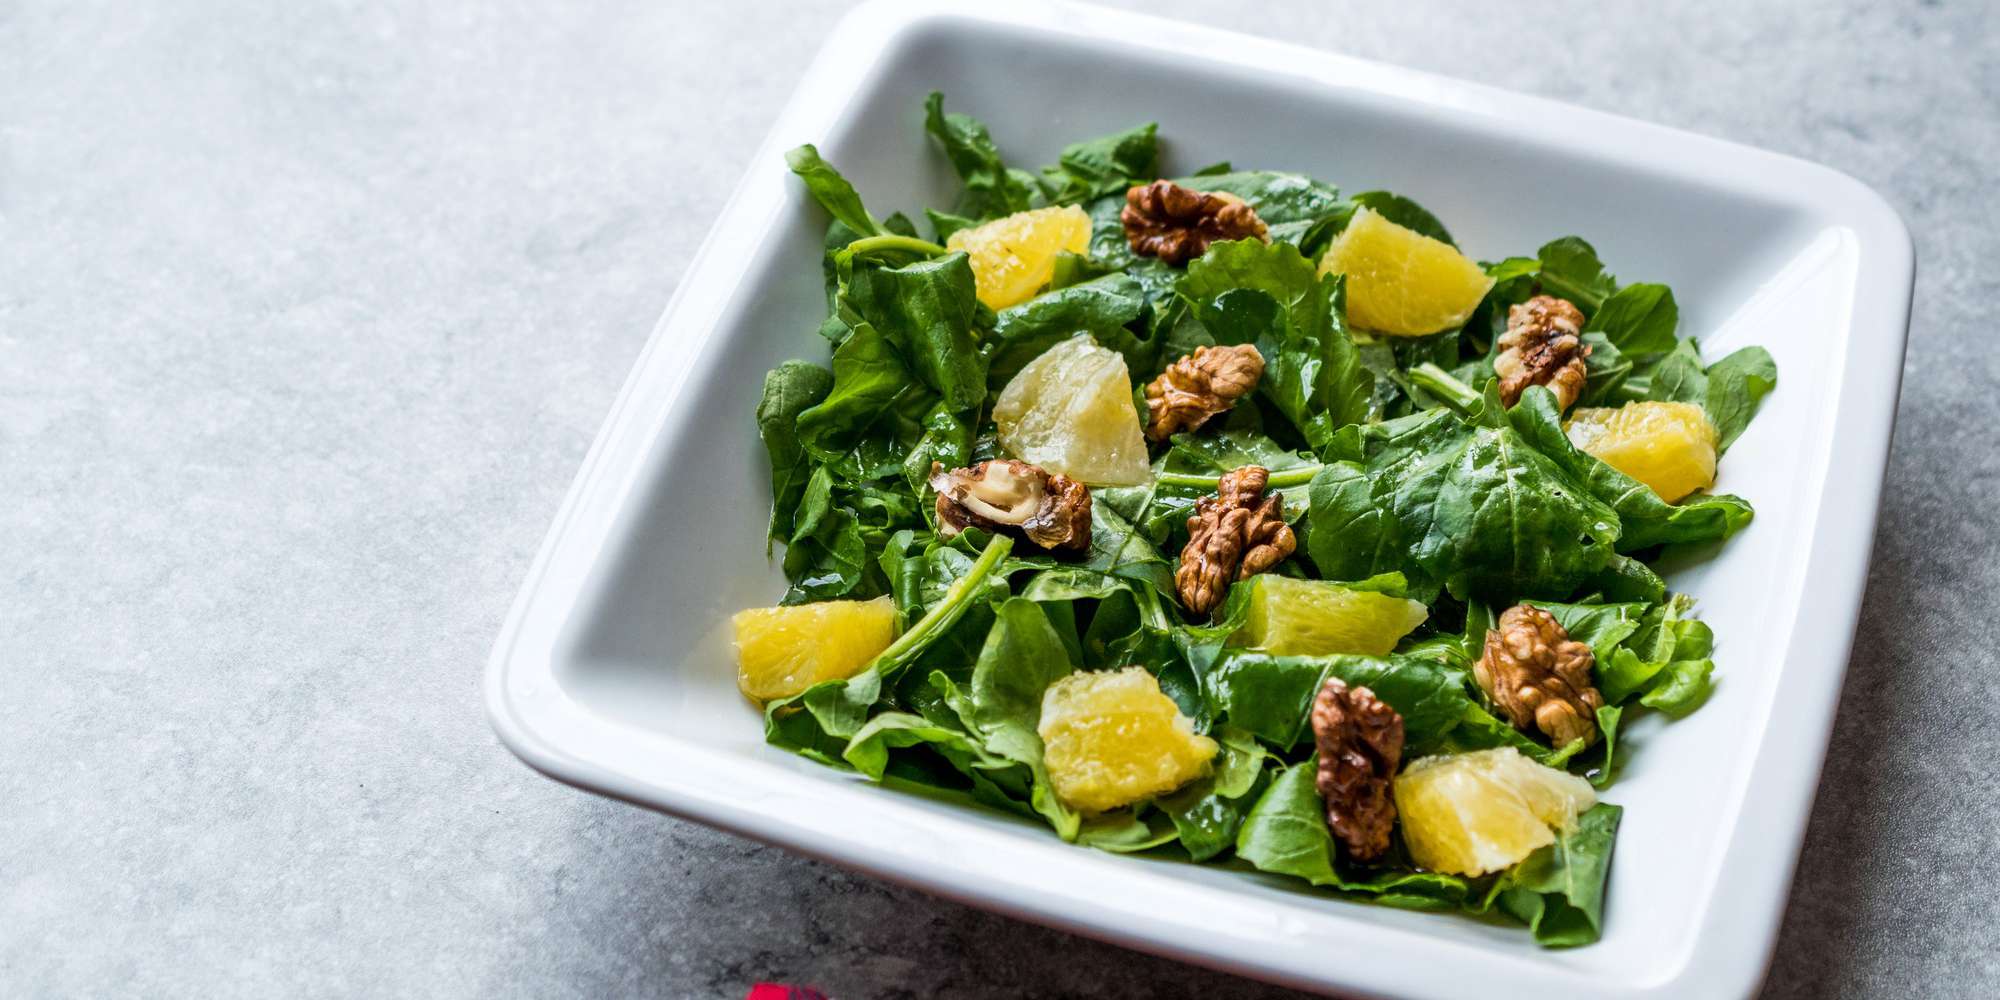 Spinach Salad with Oranges & Cranberry